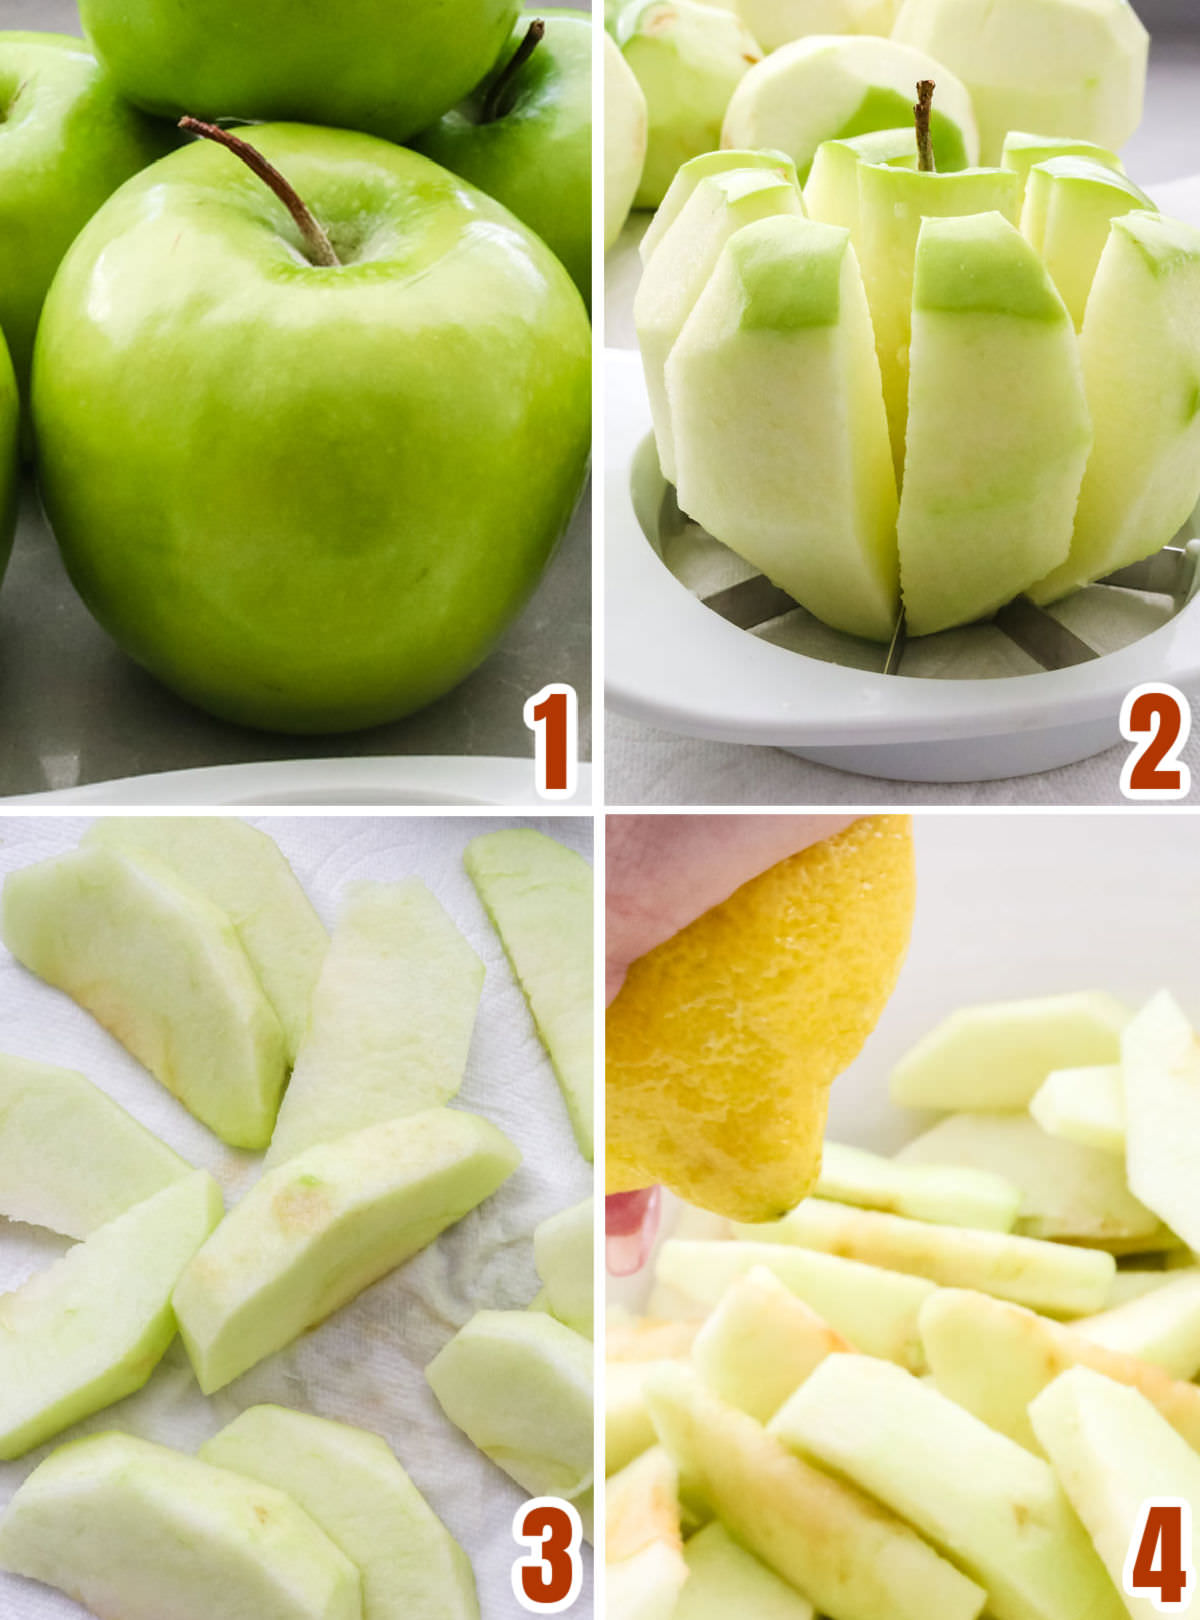 Collage image showing the steps for slicing the baking apples to prepare them for baking.